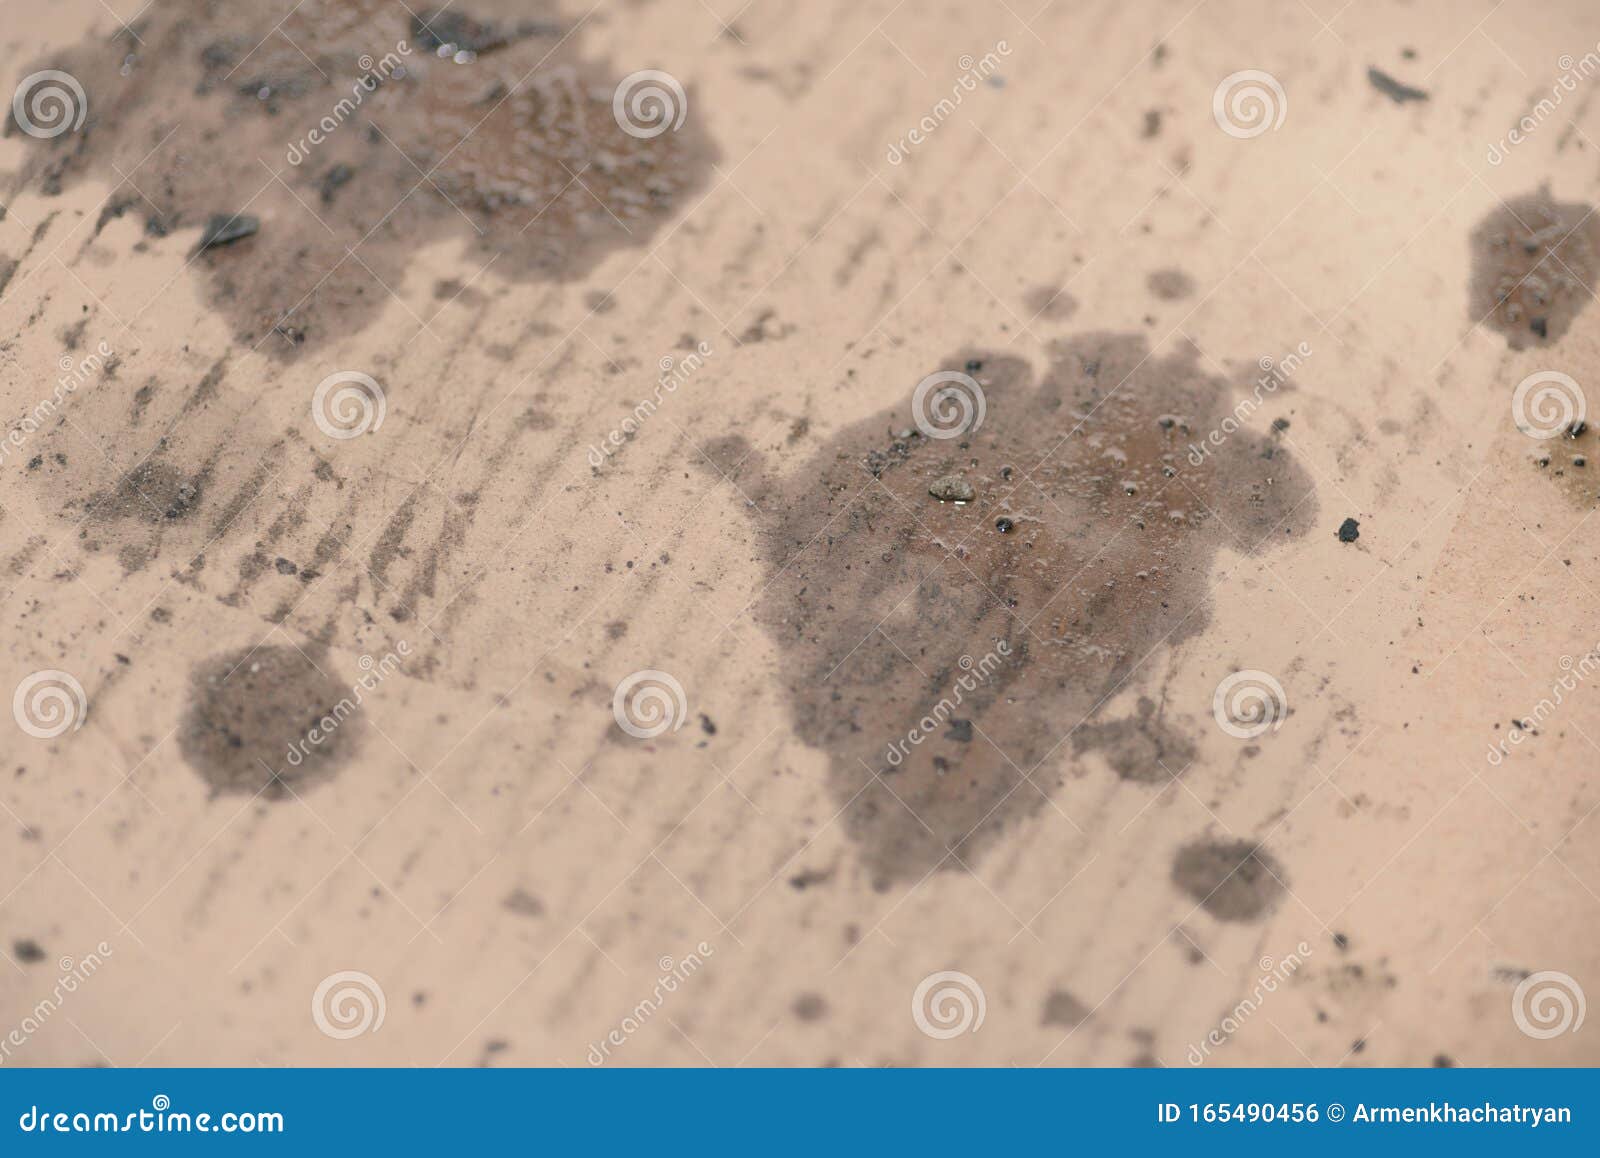 Oil Stains On Cardboard Cheap Oil Leak Absorbing Stock Photo